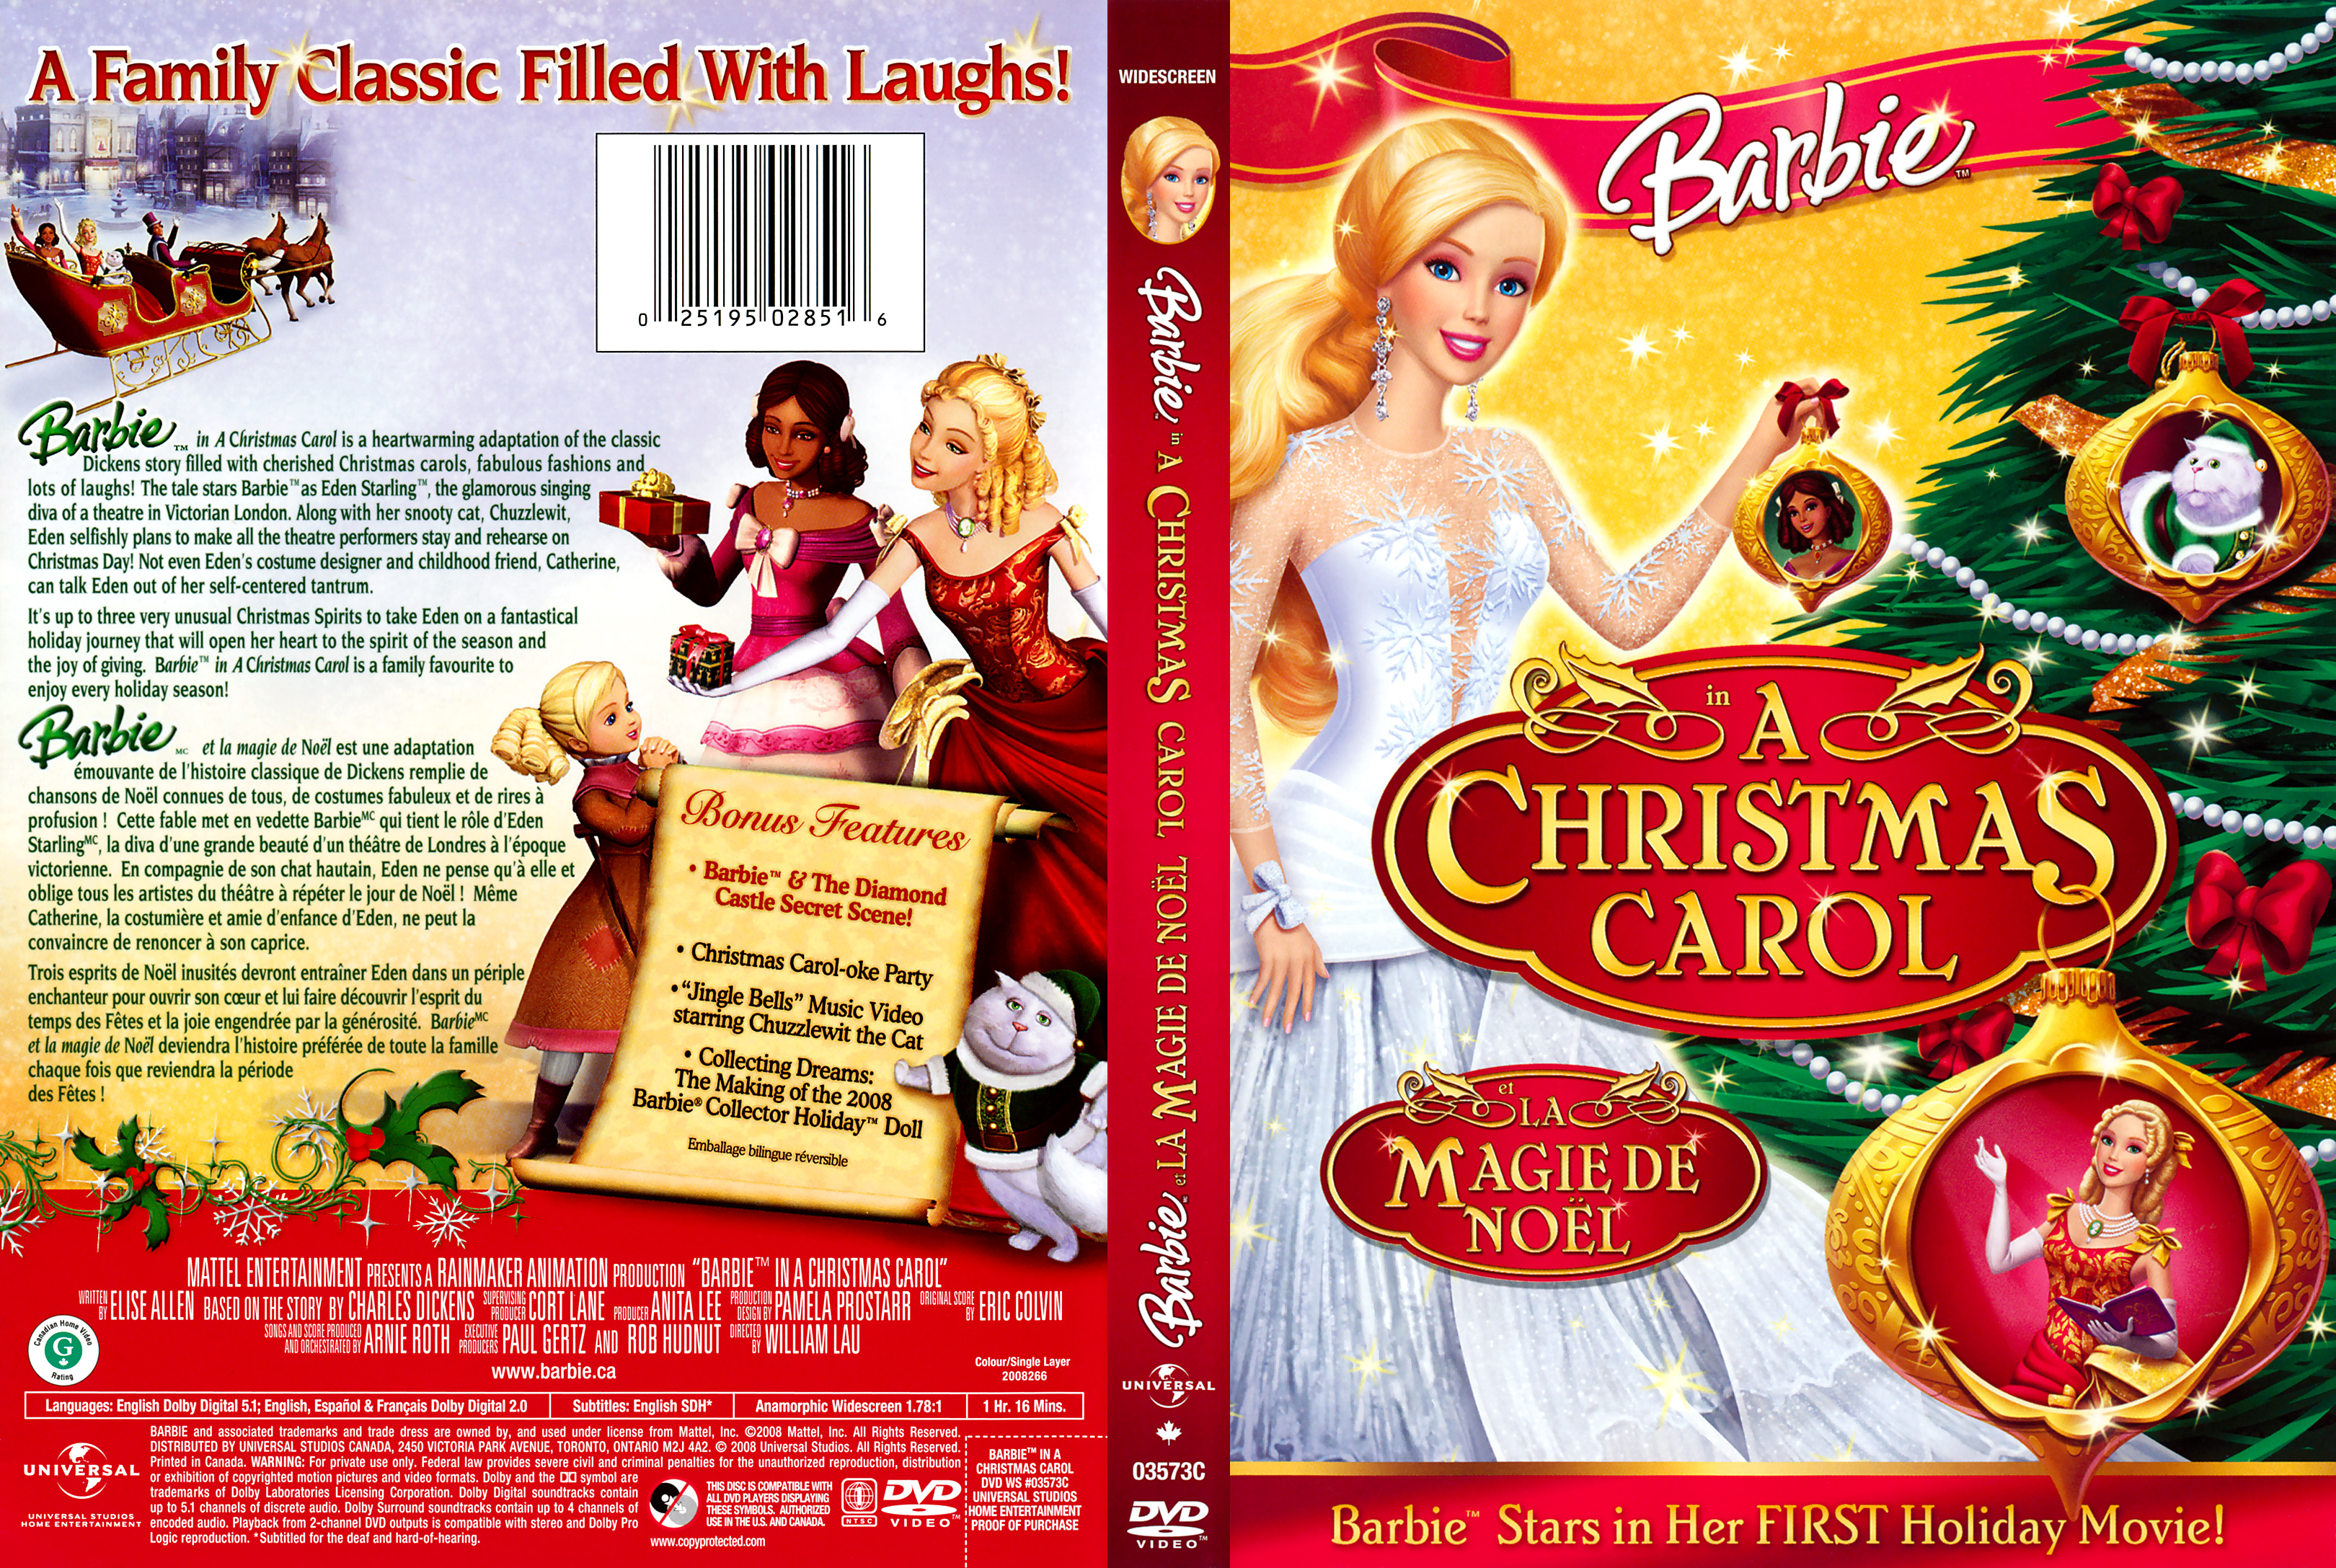 Barbie In A Christmas Carol | DVD Covers | Cover Century | Over 500.000 Album Art covers for free